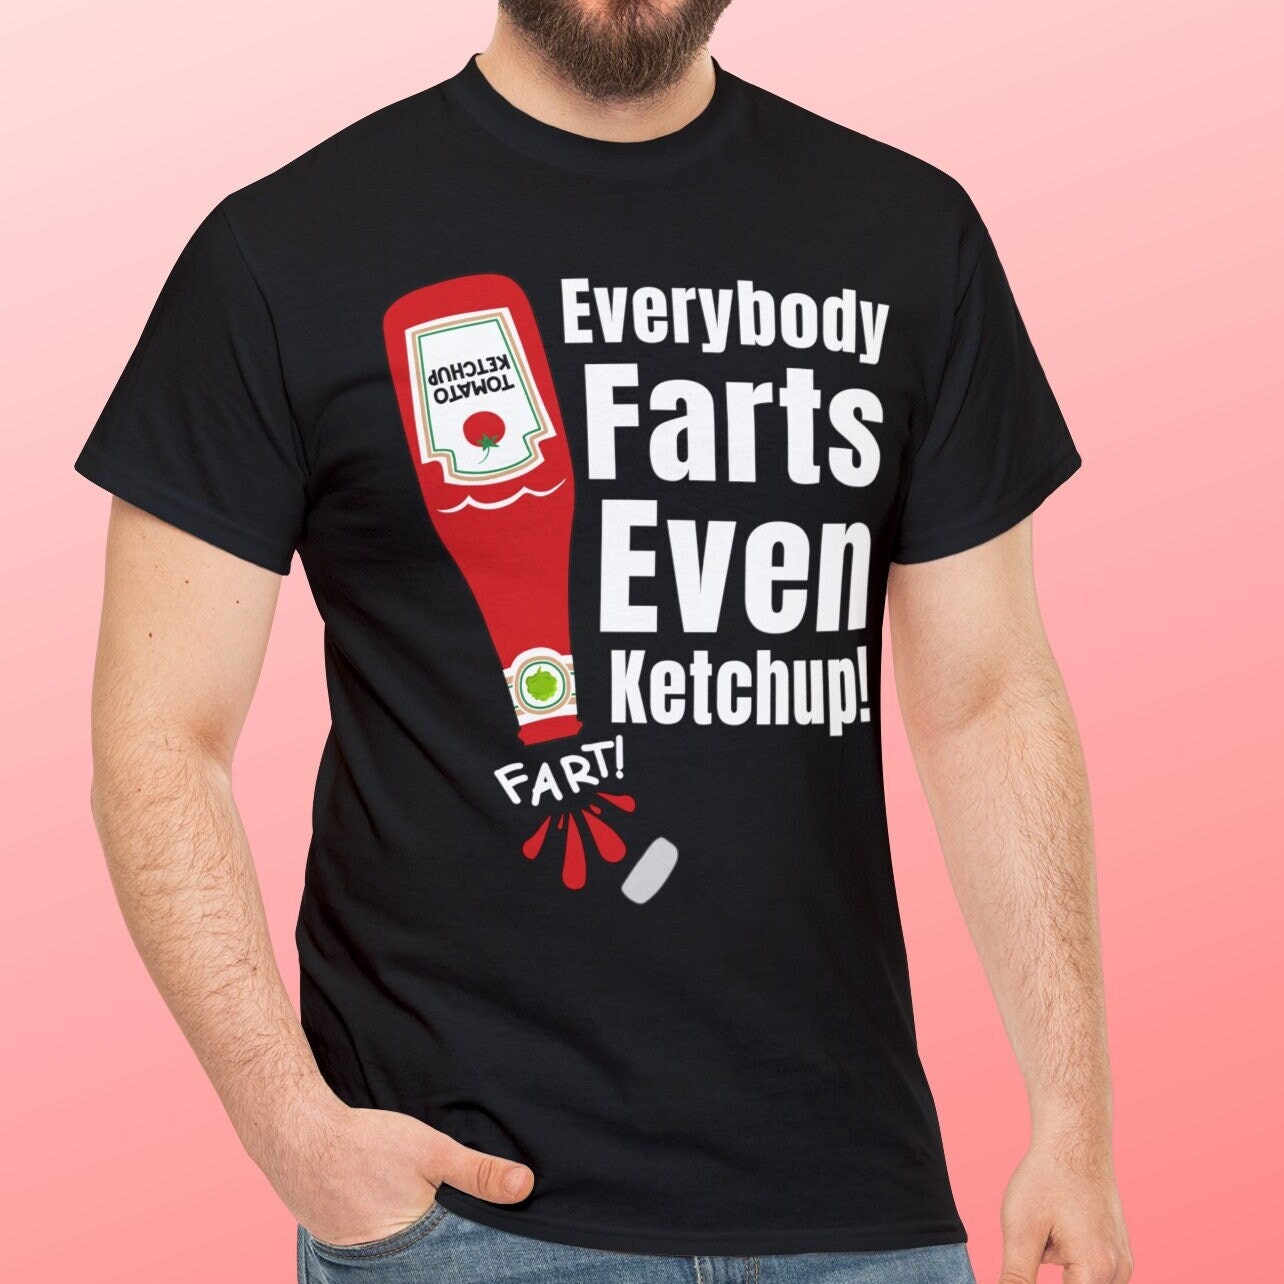 Farting Ketchup T-shirt Funny Fart Shirt Everybody Farts Even Ketchup Shirt  Ketchup Lovers Tshirt Fart Gifts for Men or Women 